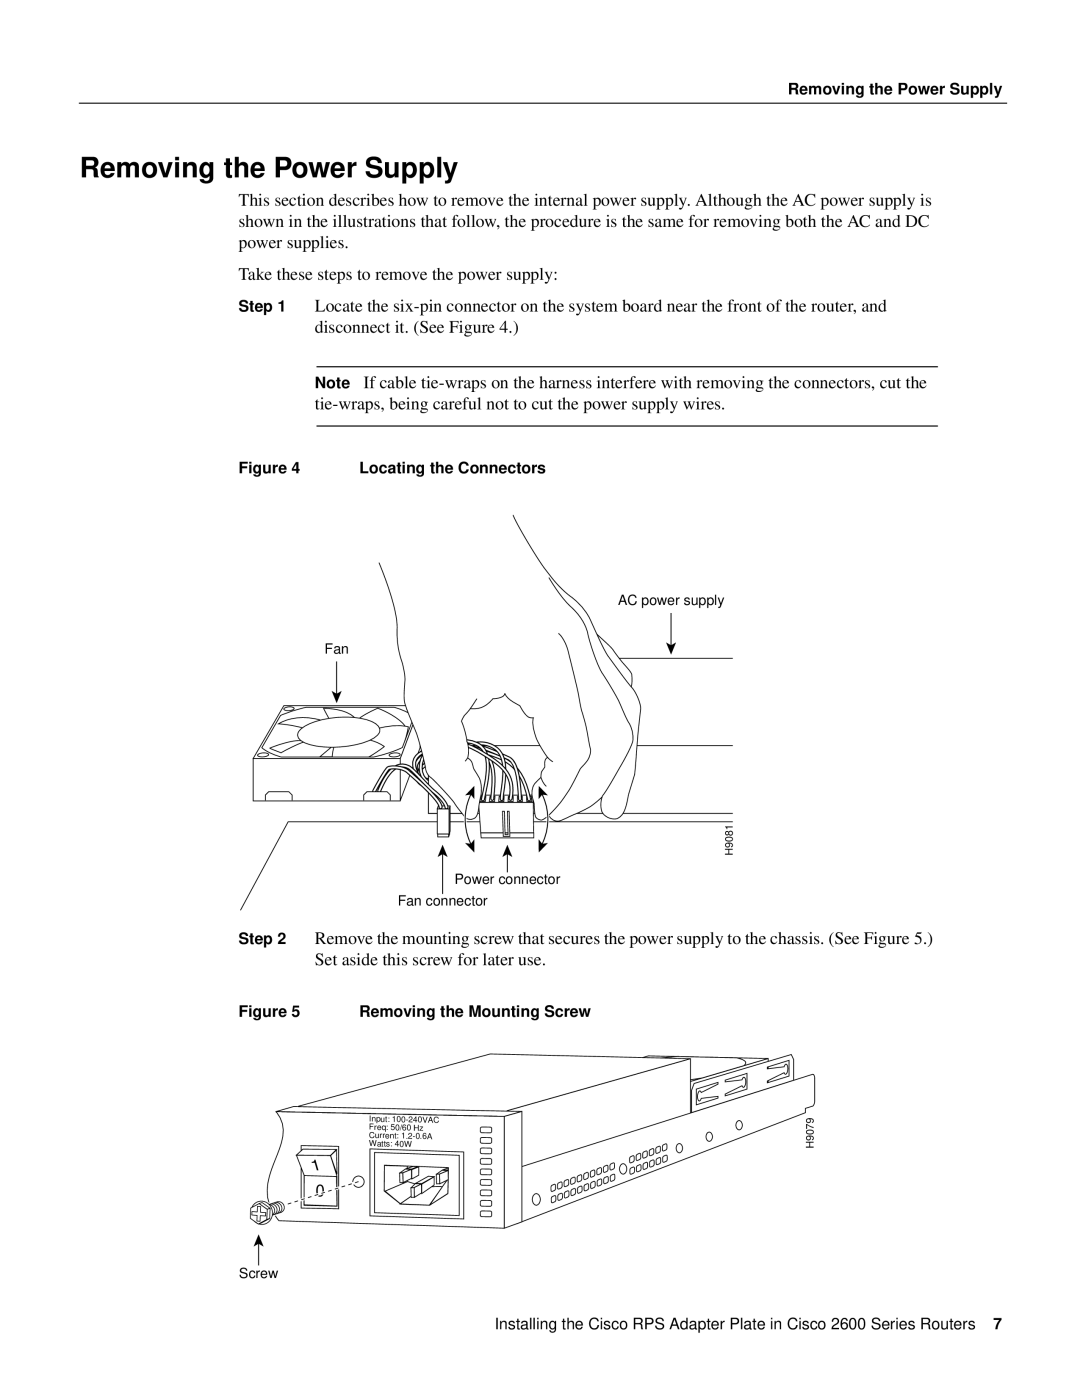 Cisco Systems 2600 Series manual Removing the Power Supply 